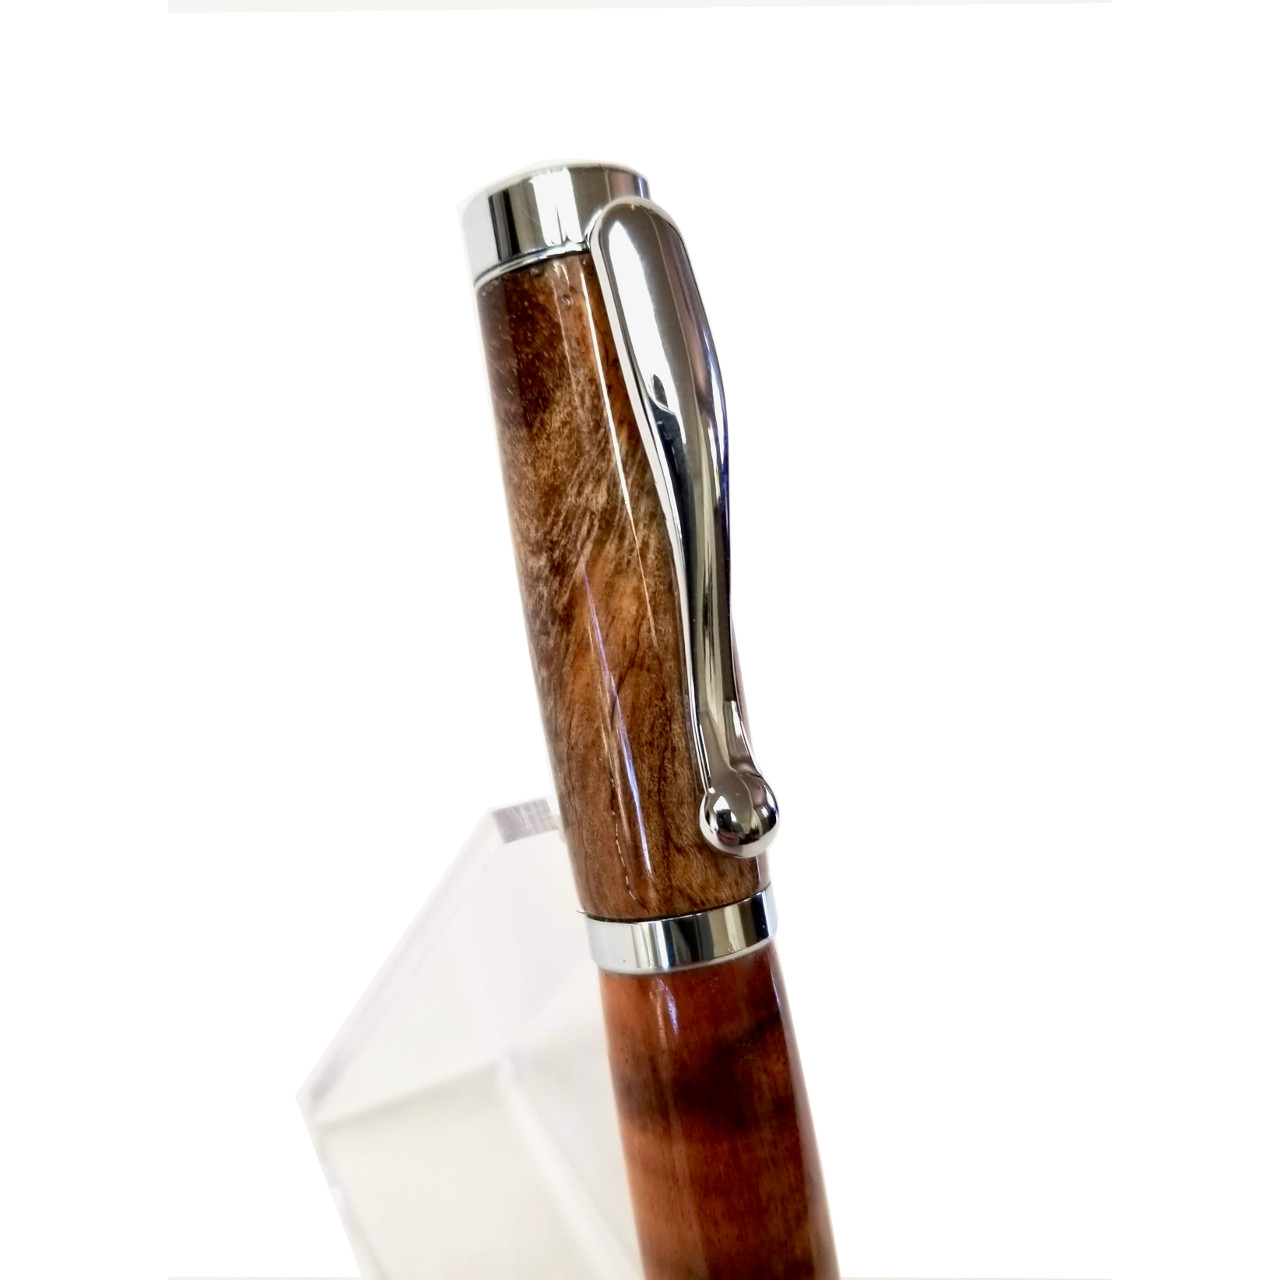 Rare Flame Box Elder hand turned pen with gold metal finish.